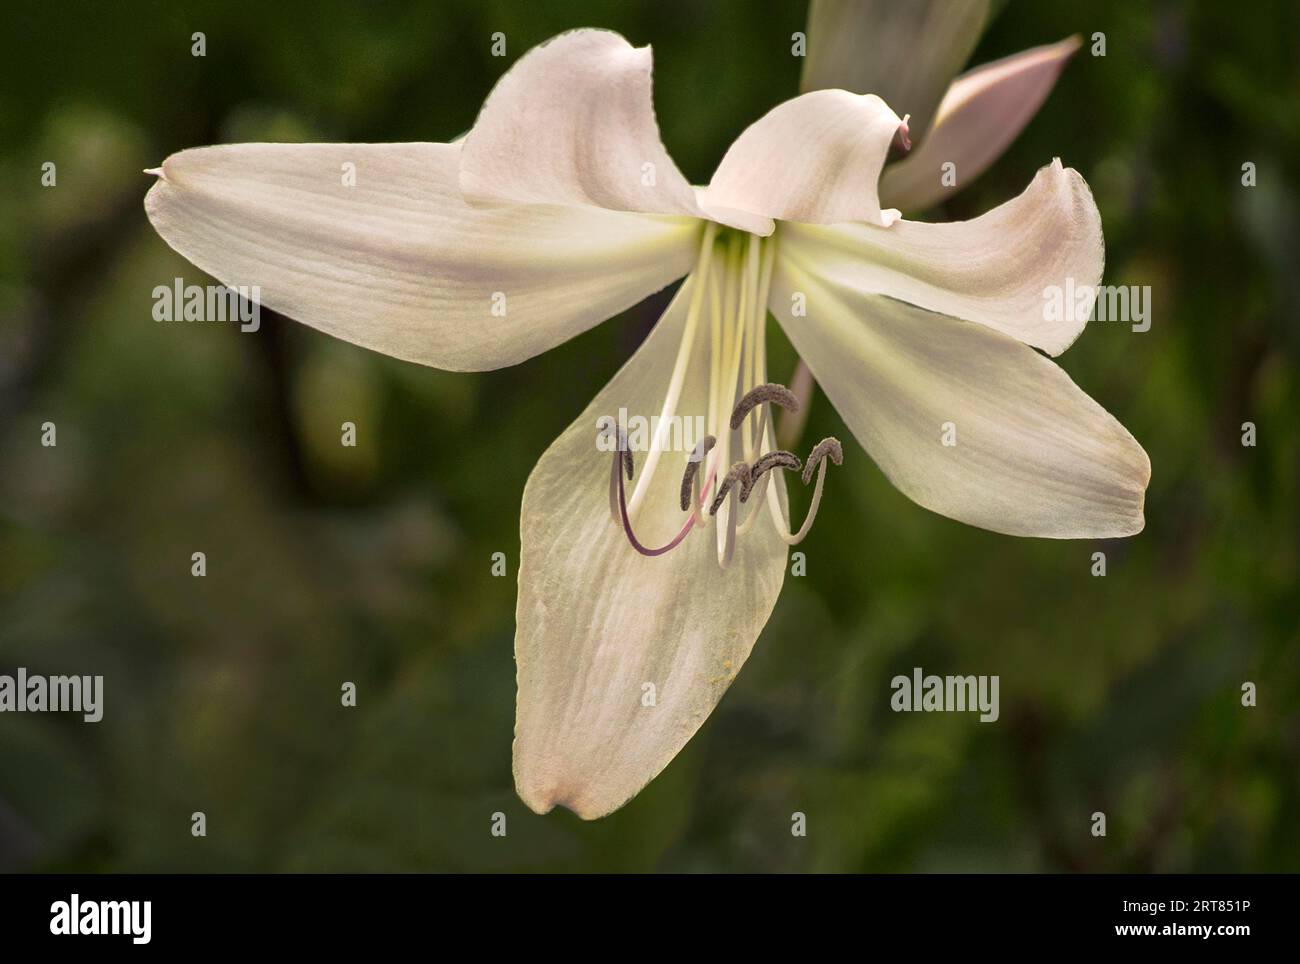 The hook lilies are a genus of plants within the Amaryllis family. The approximately 65 (up to 130) species are distributed in the coastal areas of Stock Photo